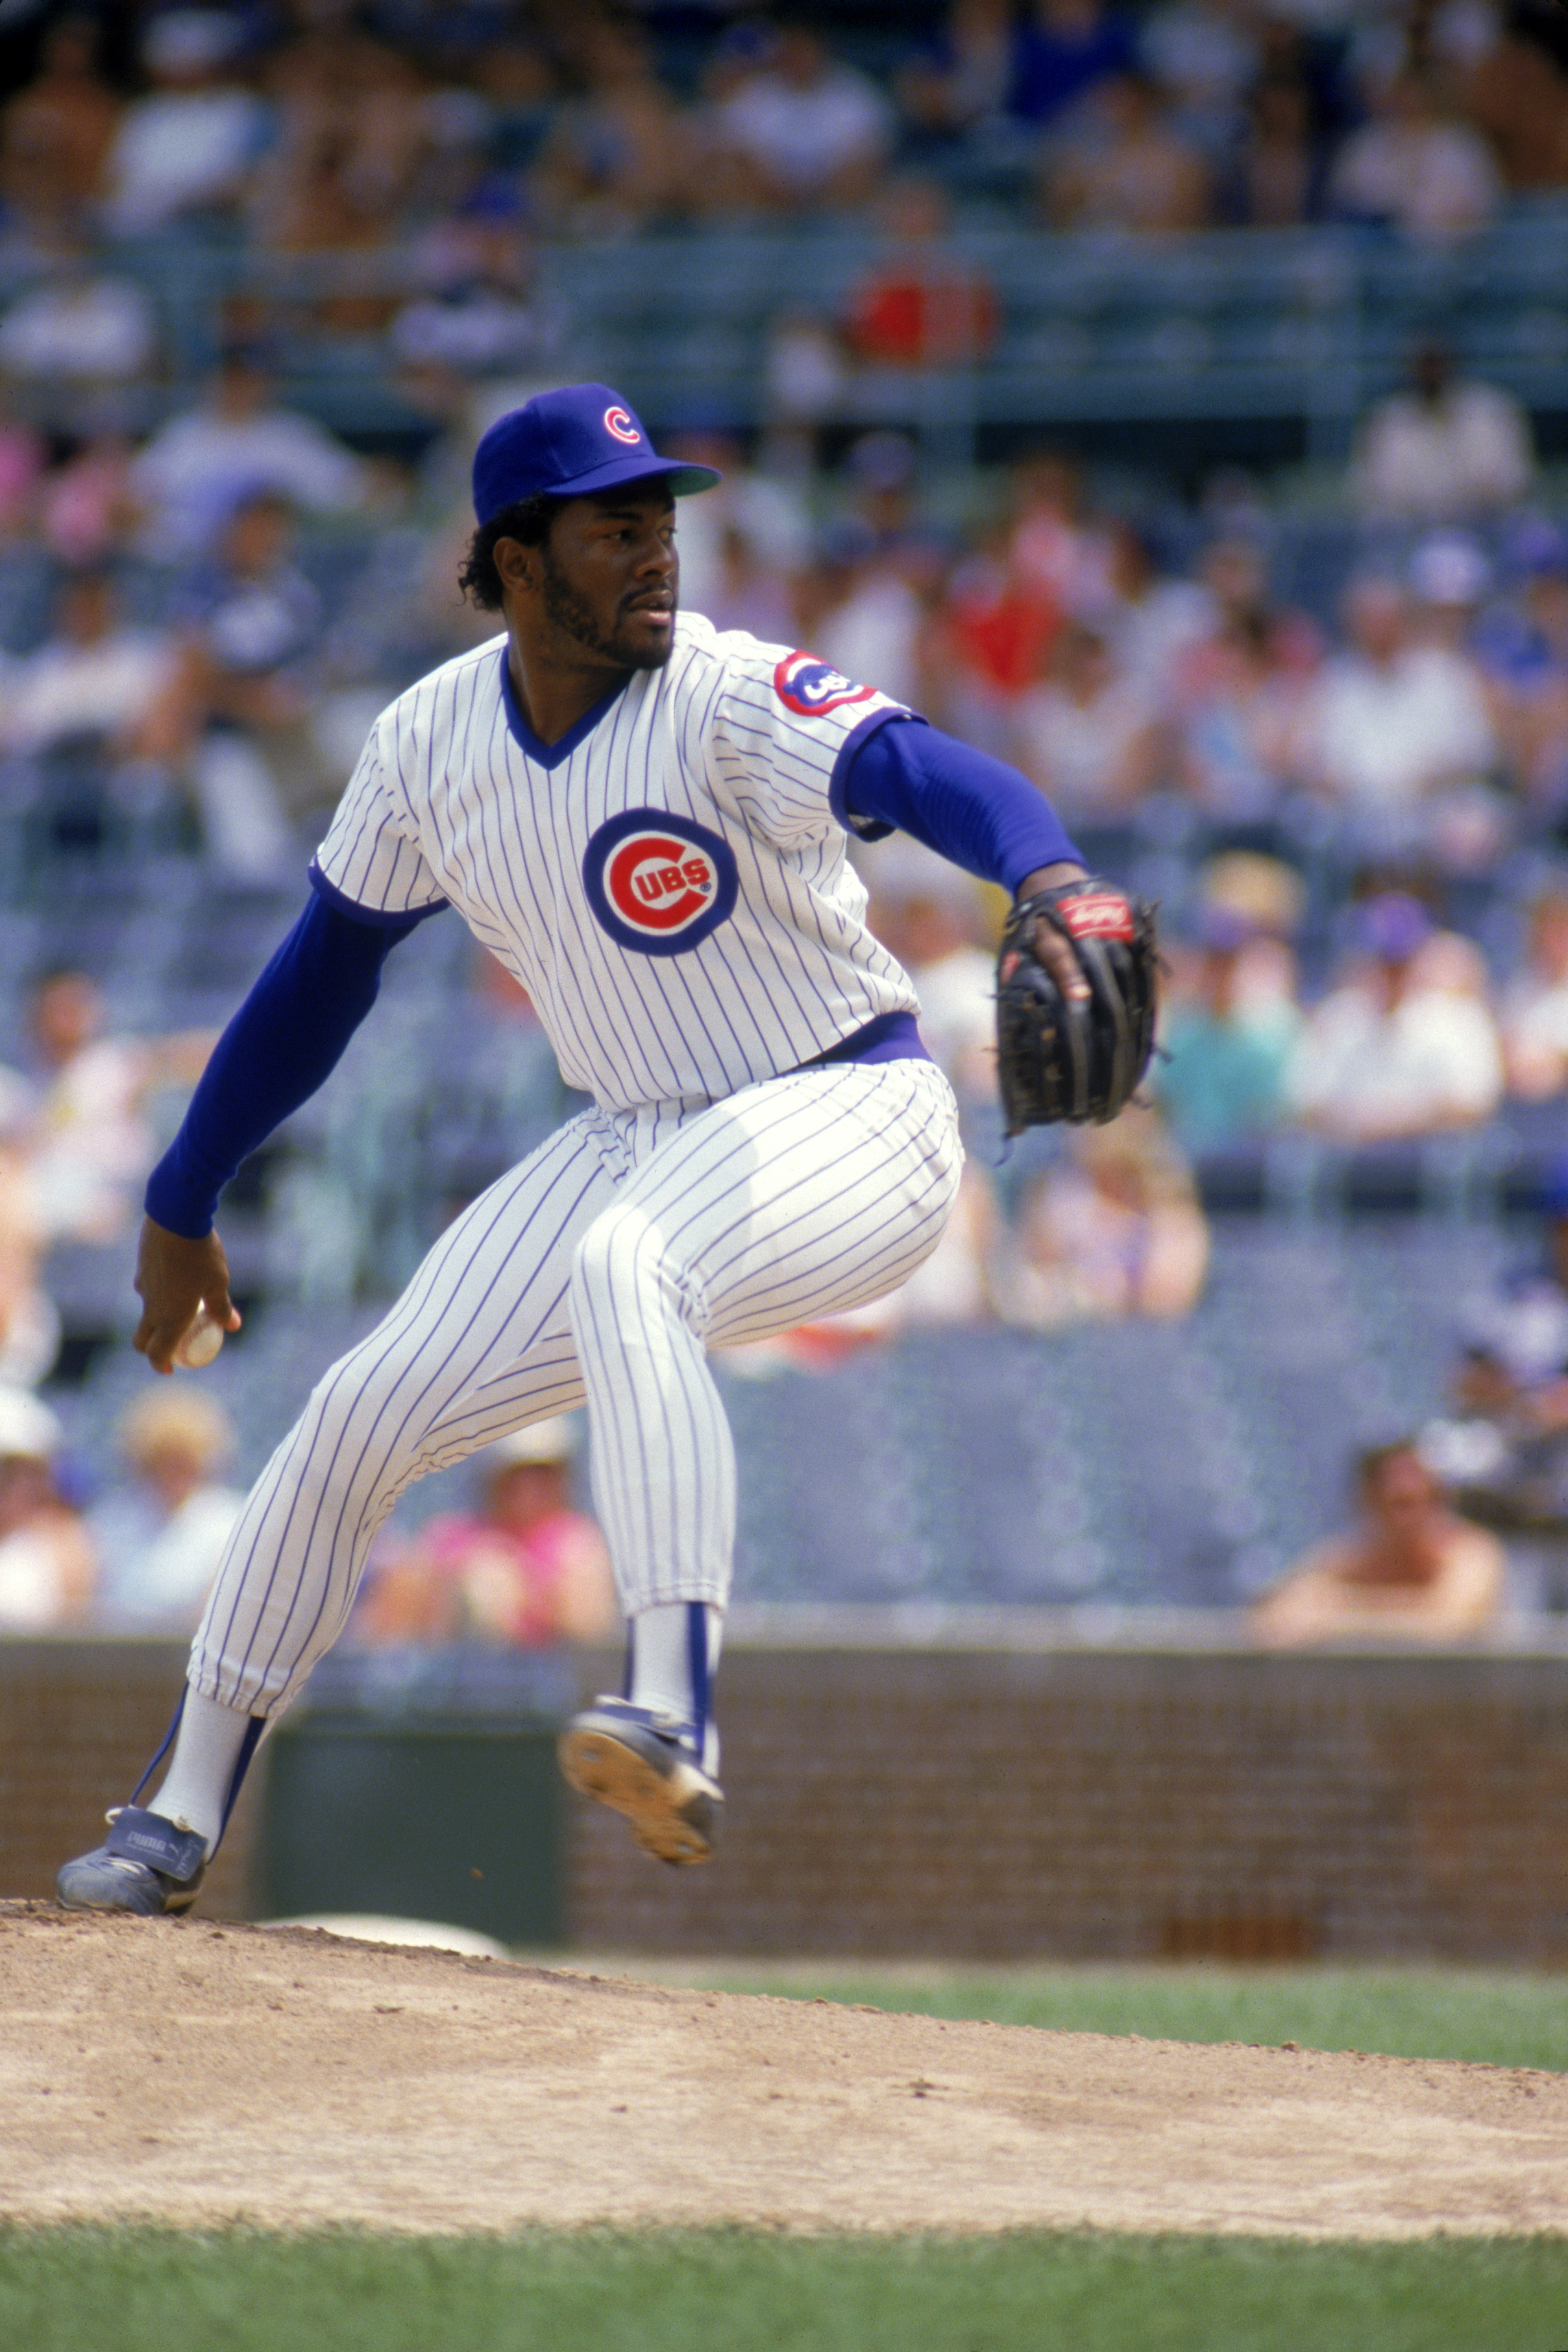 Lee Smith overpowers another batter.